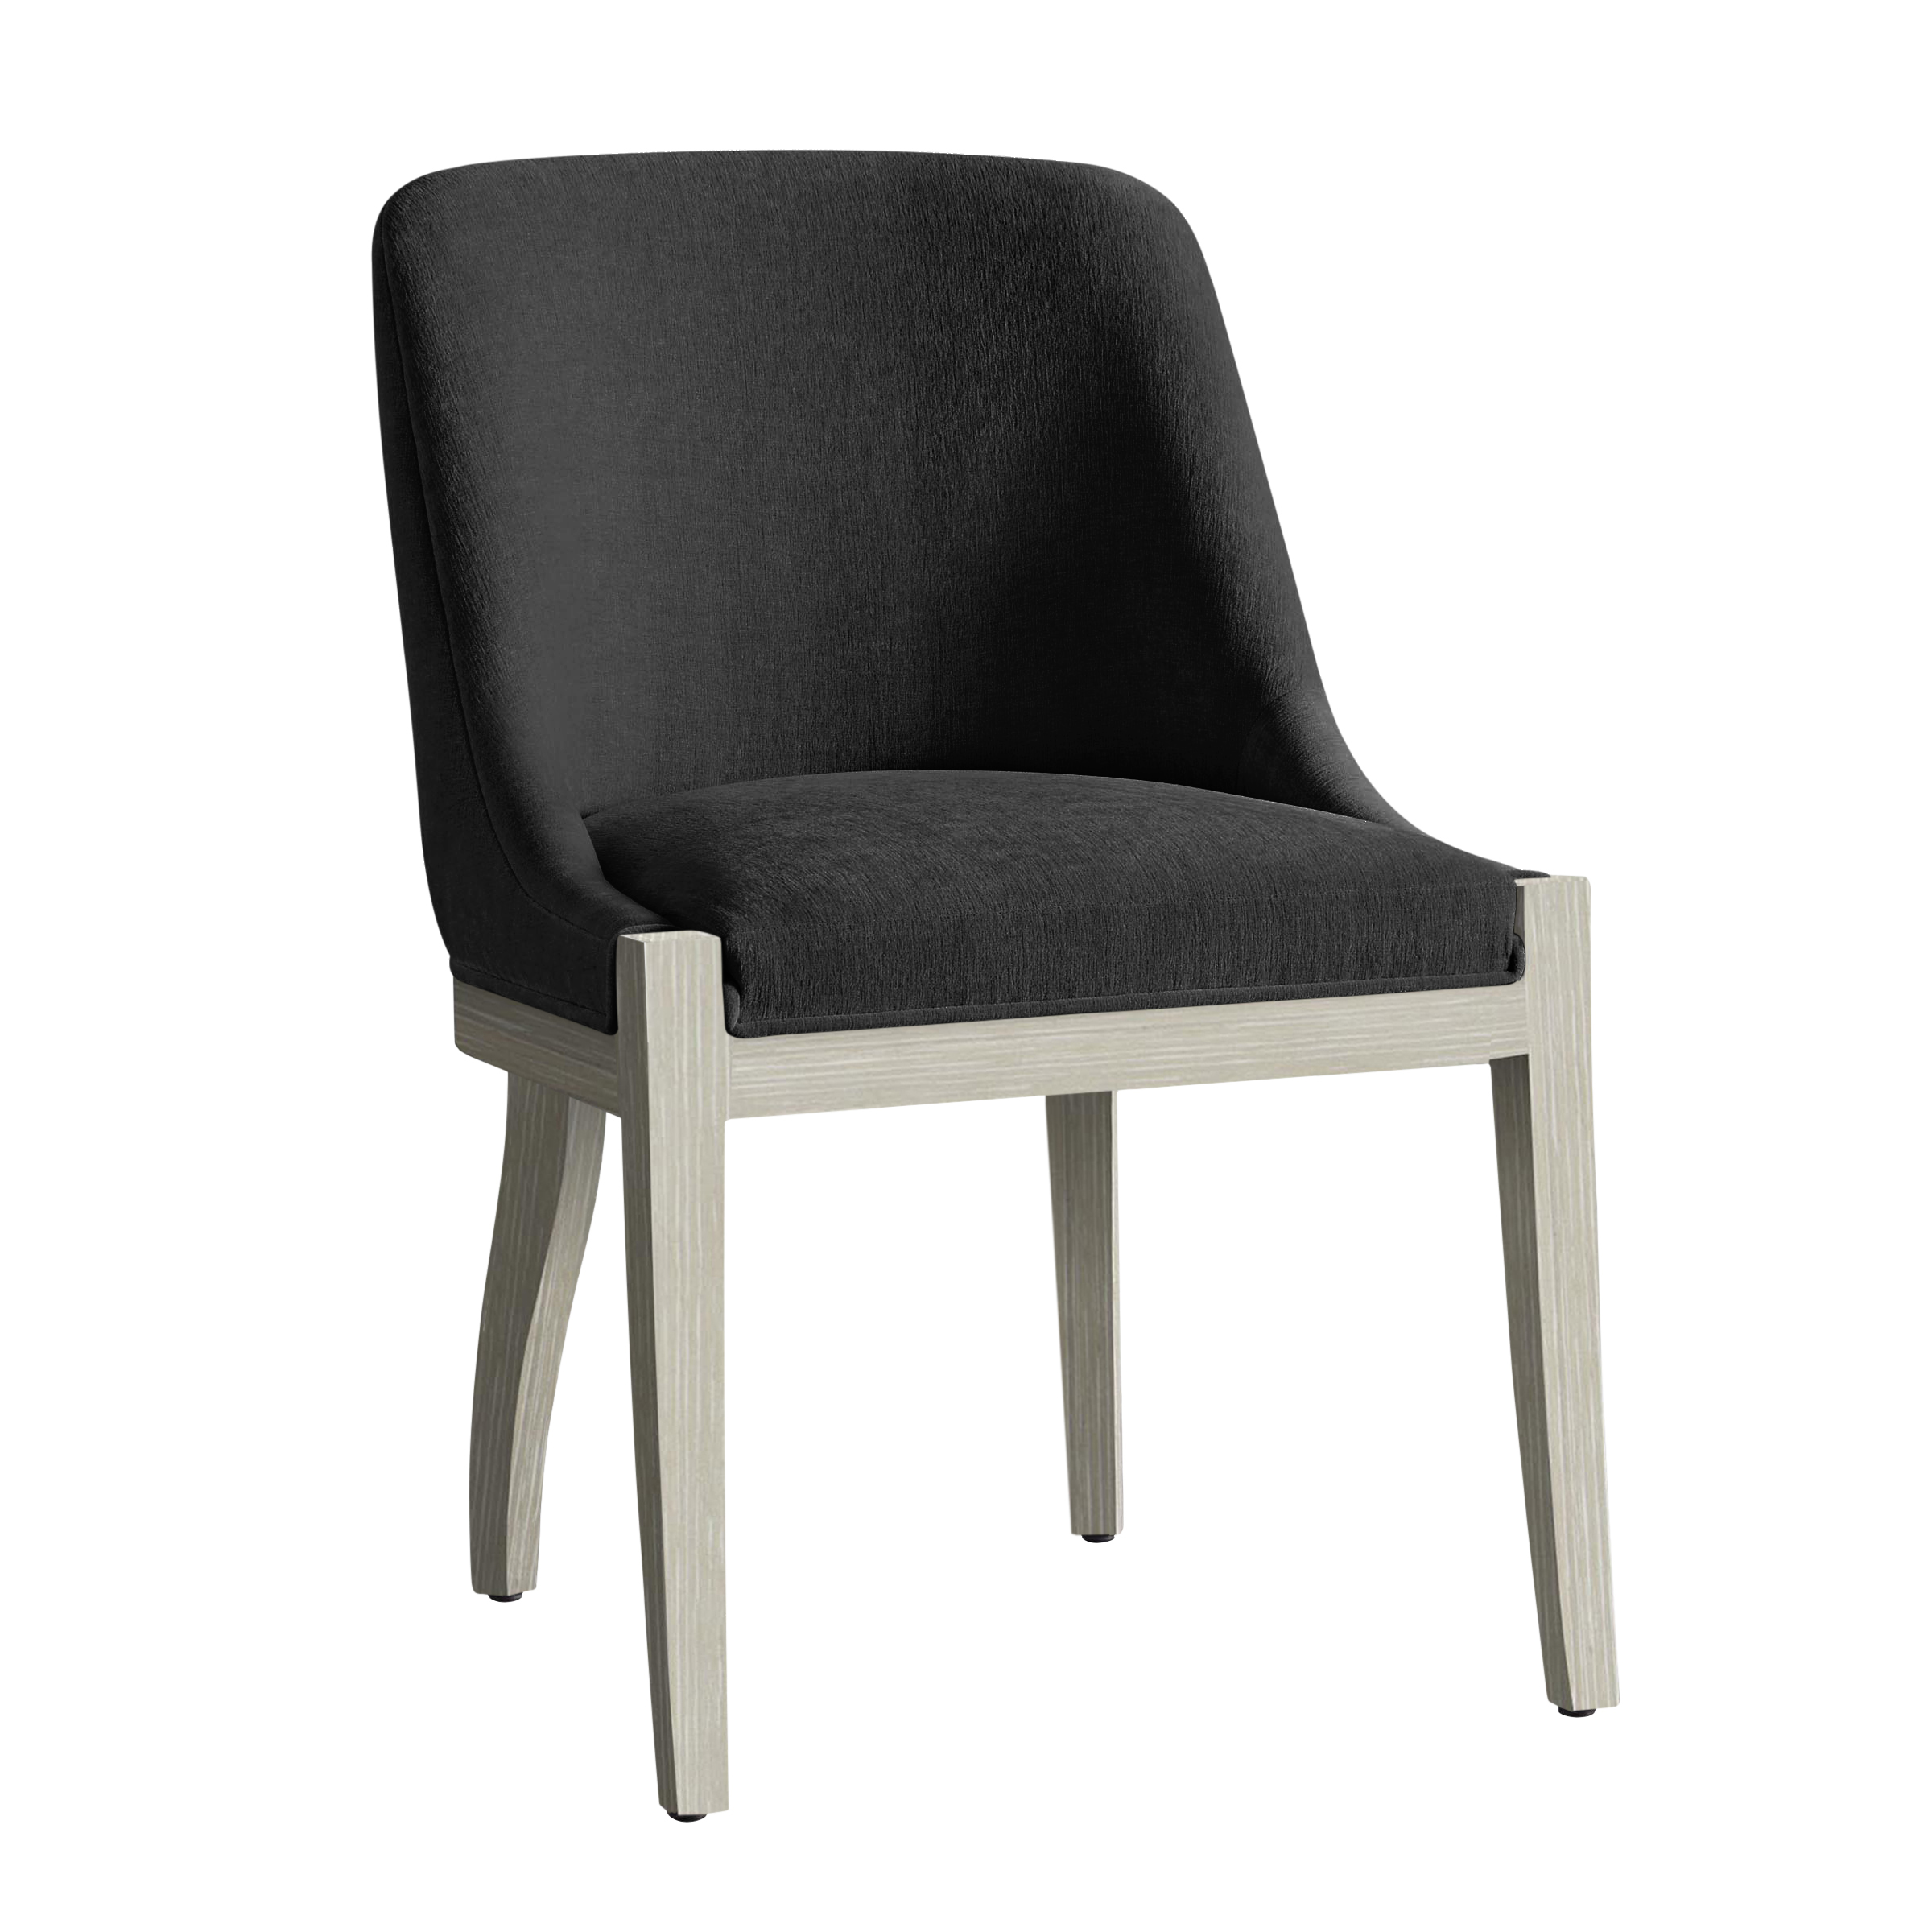 Lily Dining Chair - Natural Grey